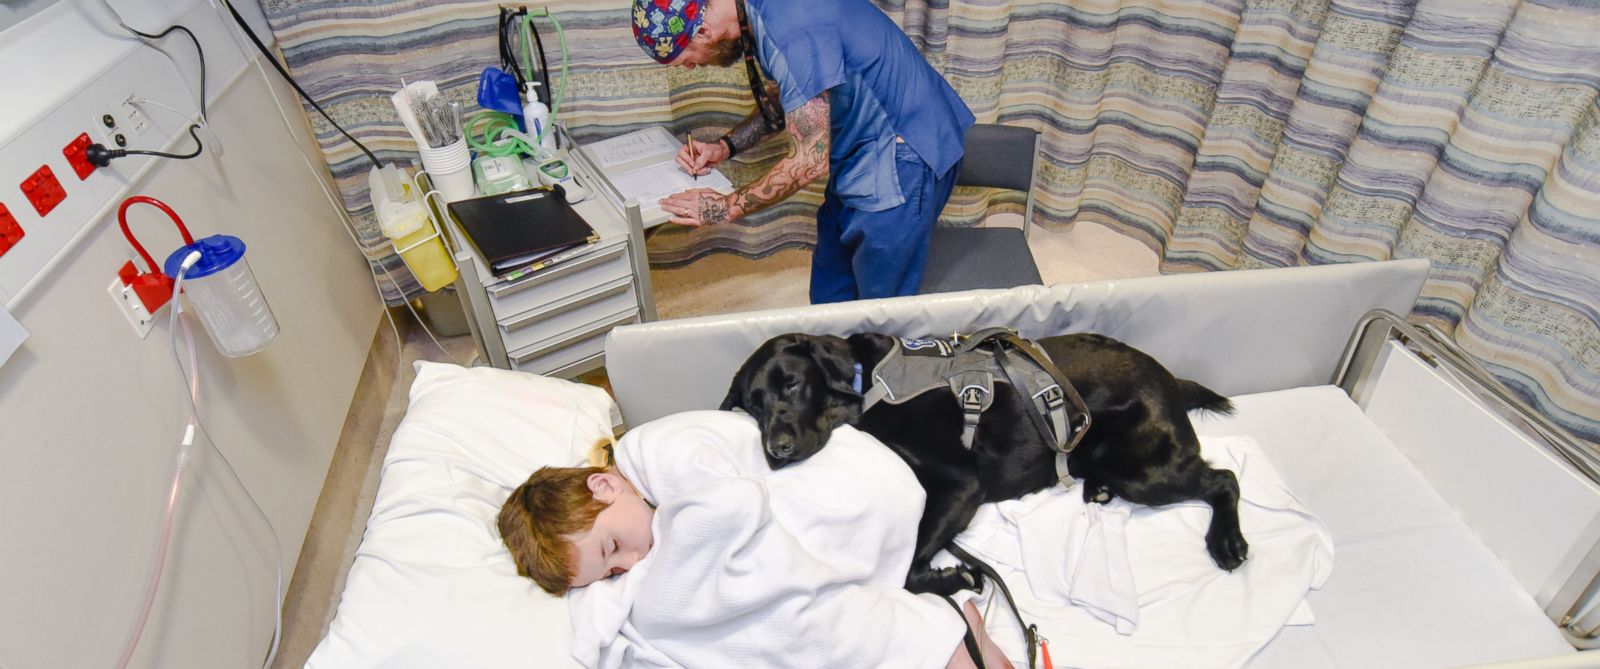 Loyal Dog Jumps on Hospital Bed to Comfort 9-Year-Old Boy With Autism